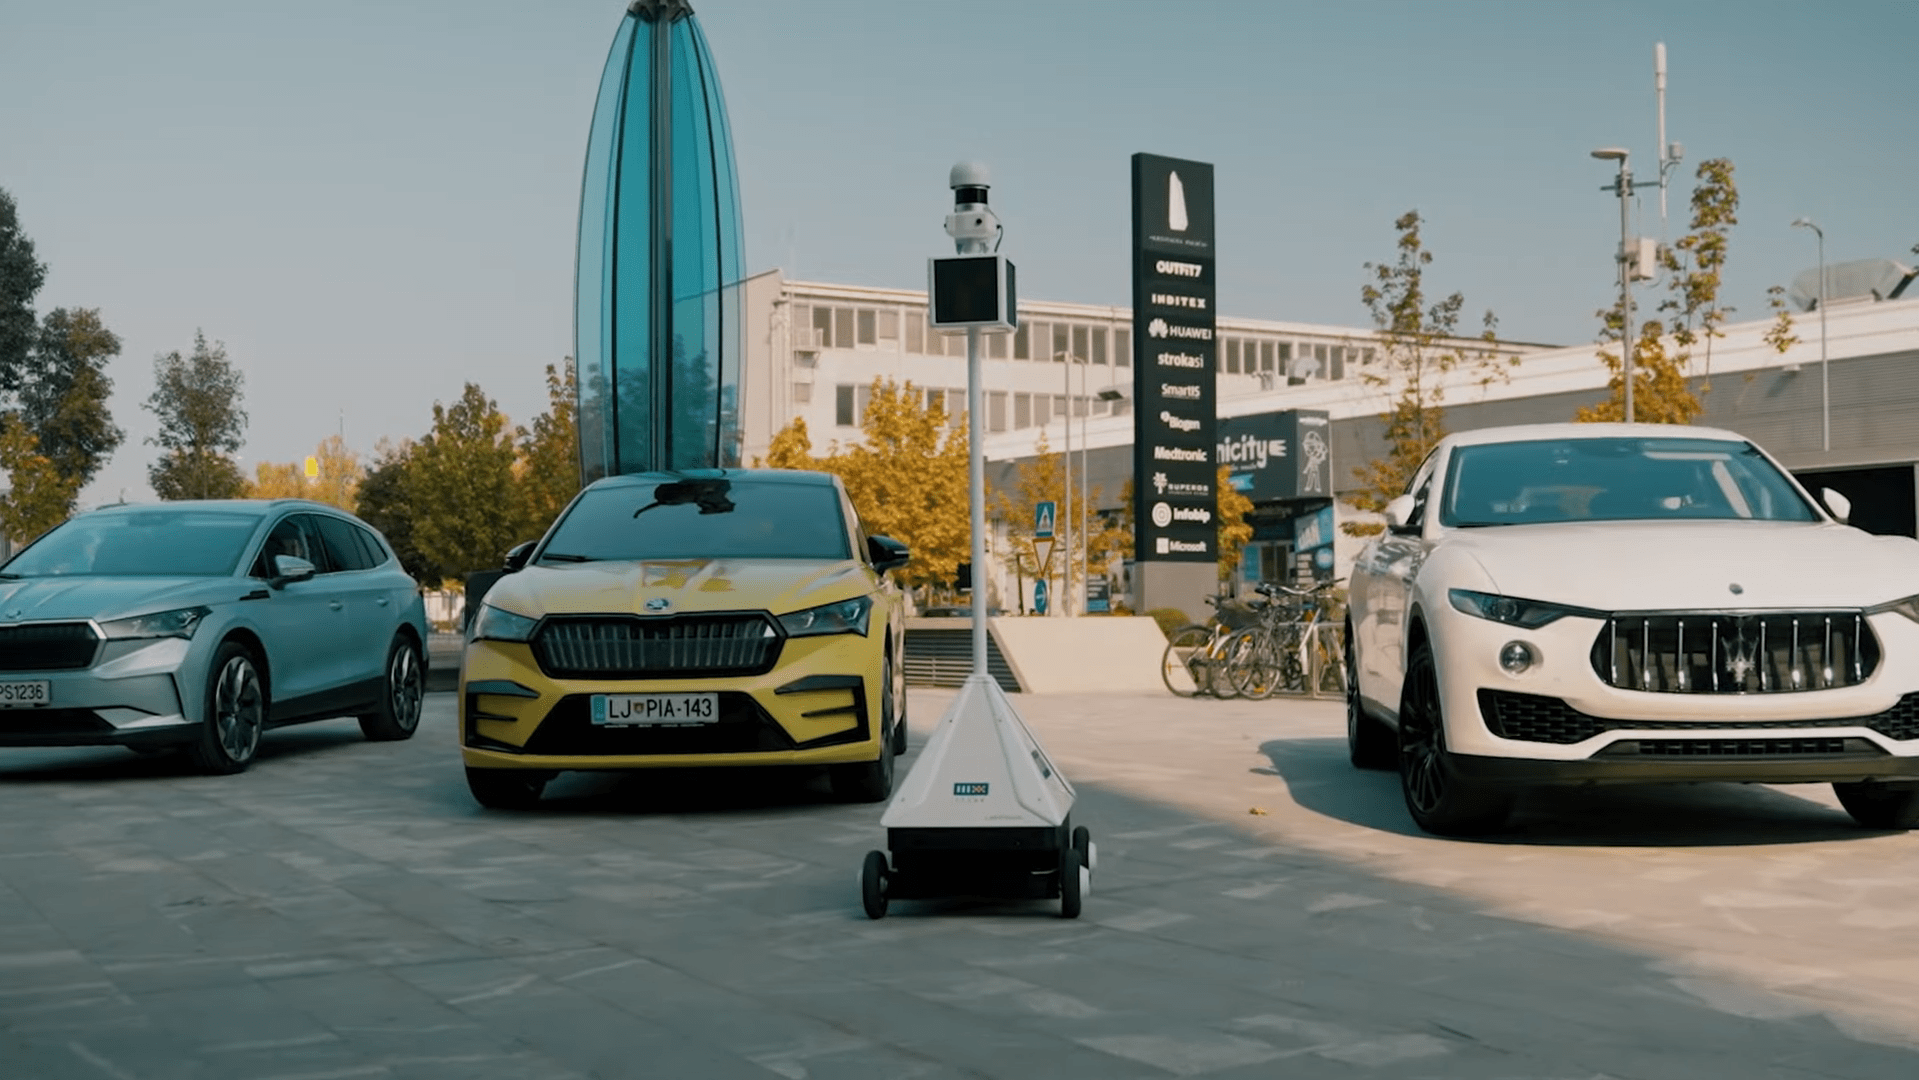 Škoda Found a Good Use for Big Grilles and Robots: Pedestrian Safety